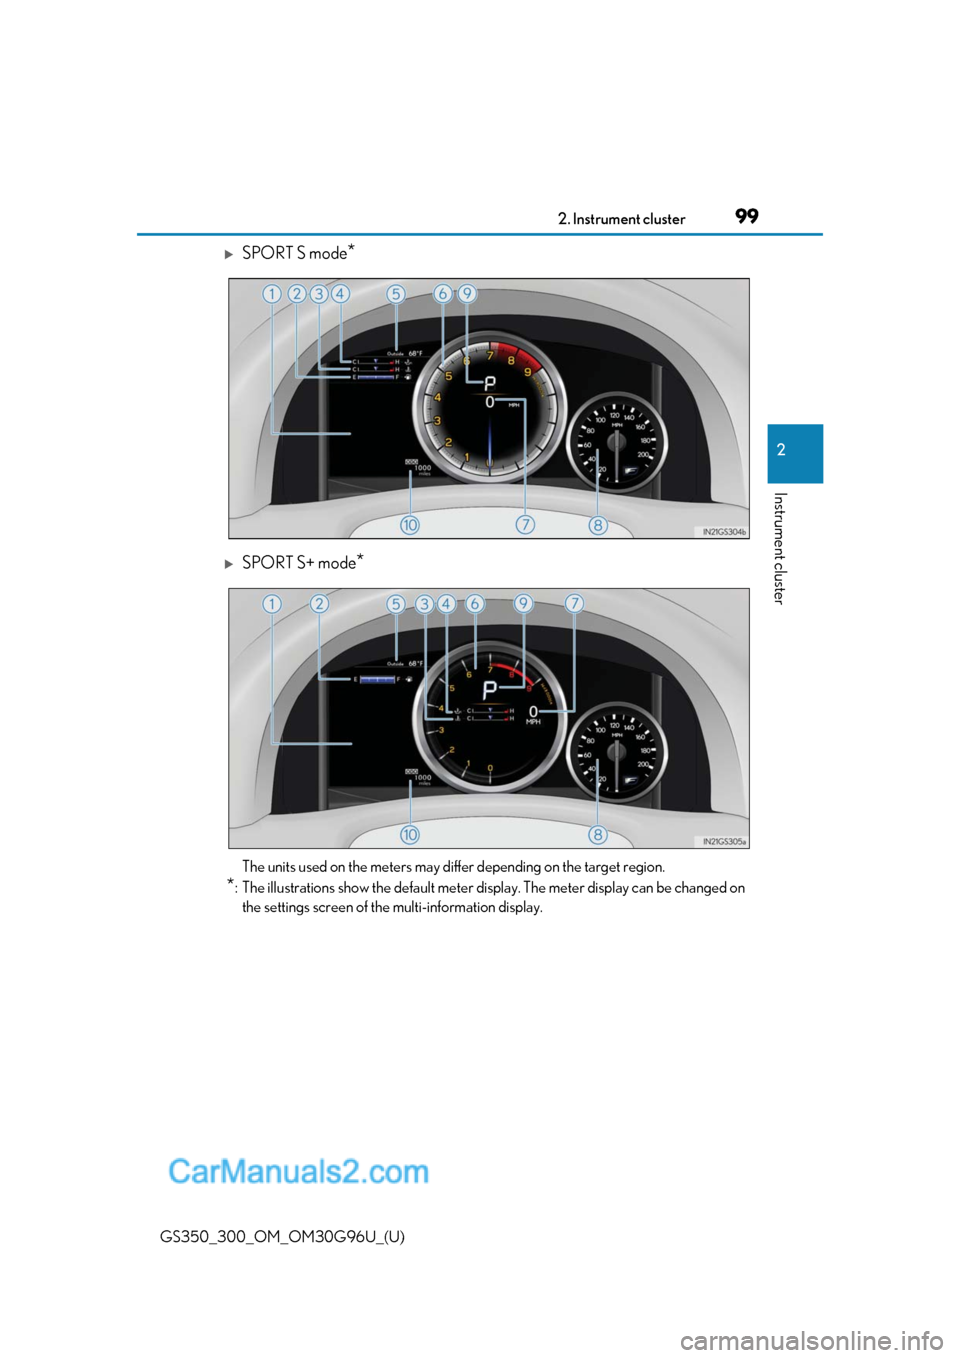 Lexus GS300 2019 Owners Manual GS350_300_OM_OM30G96U_(U)
992. Instrument cluster
2
Instrument cluster
SPORT S mode*
SPORT S+ mode*
The units used on the meters may differ depending on the target region.
*: The illustrations s